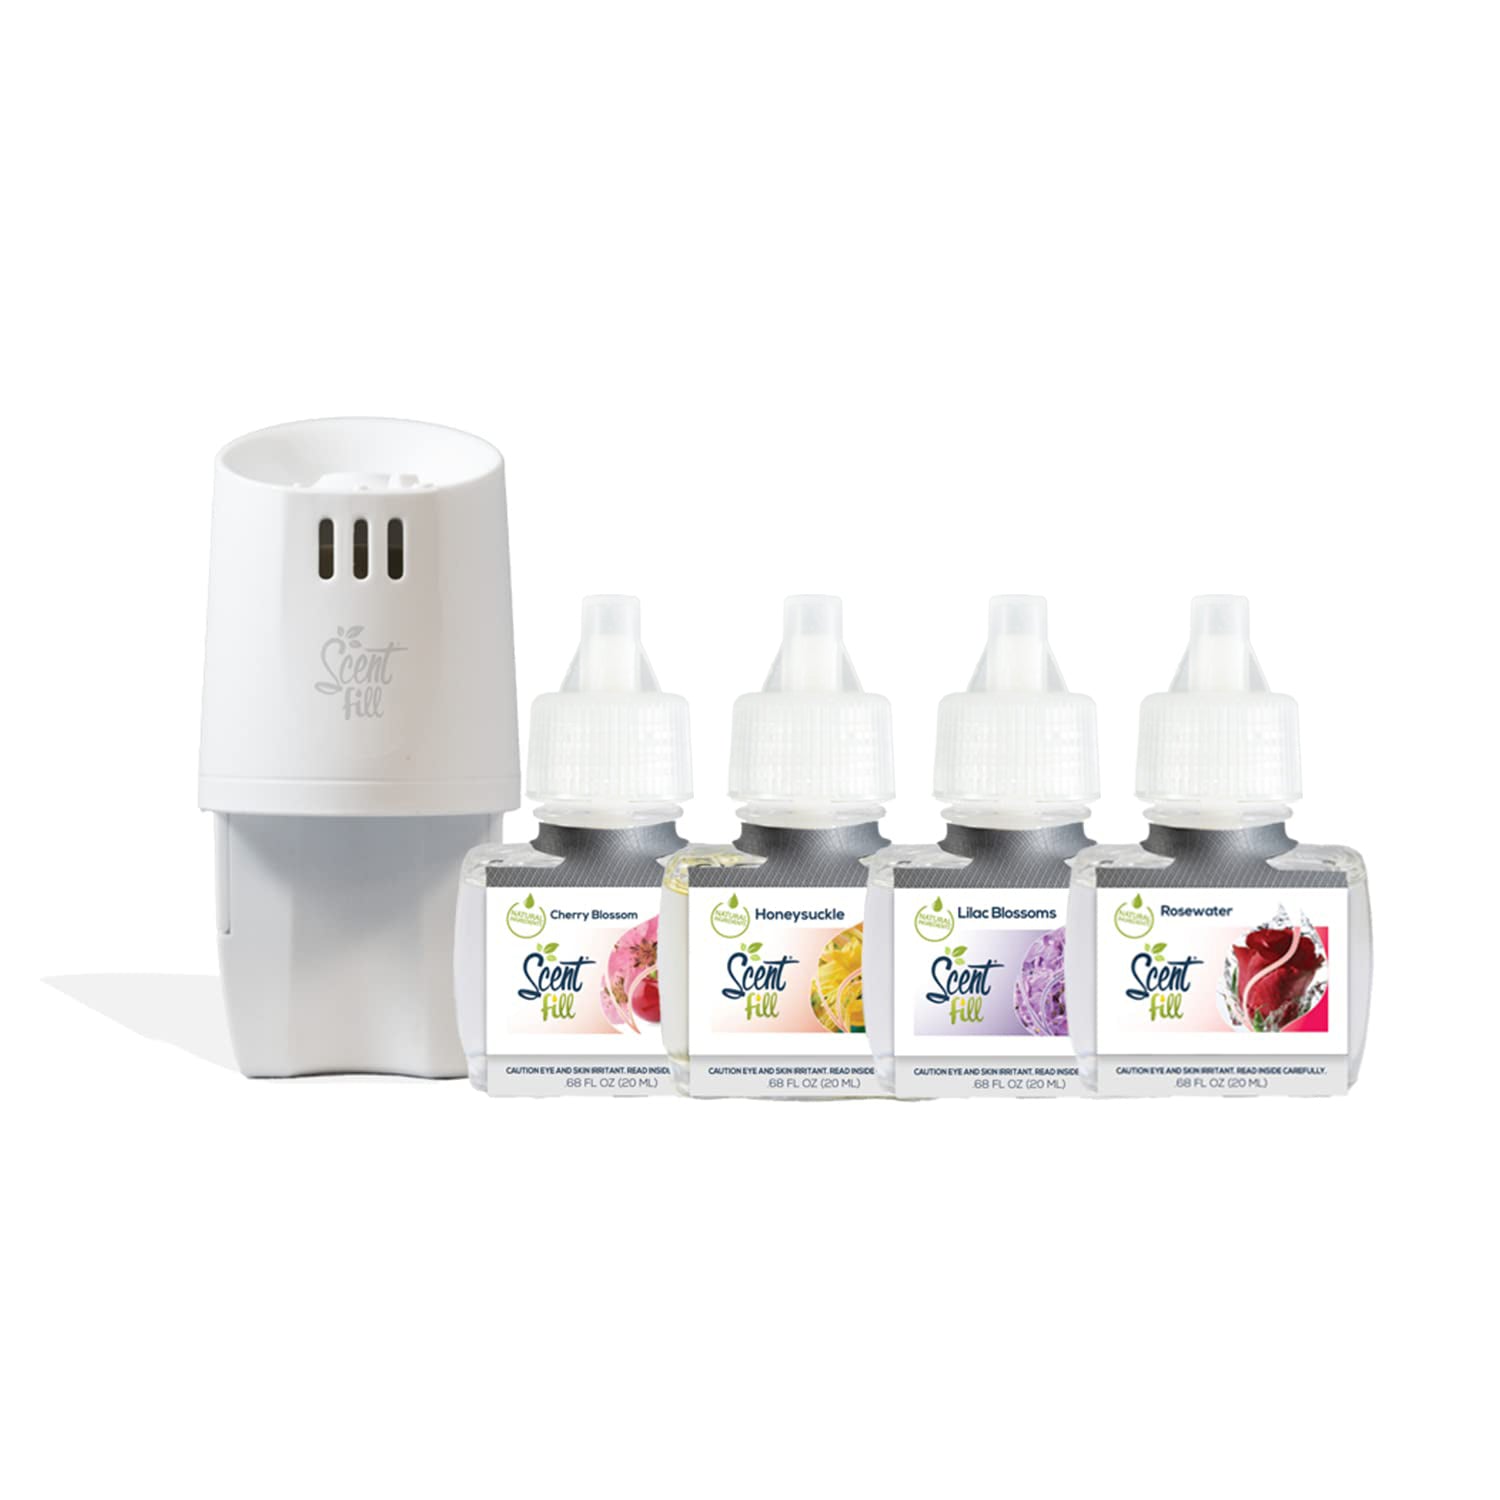 Customizable Spring Air Freshener Kit Pick 4 Scents with Scent Fill® W